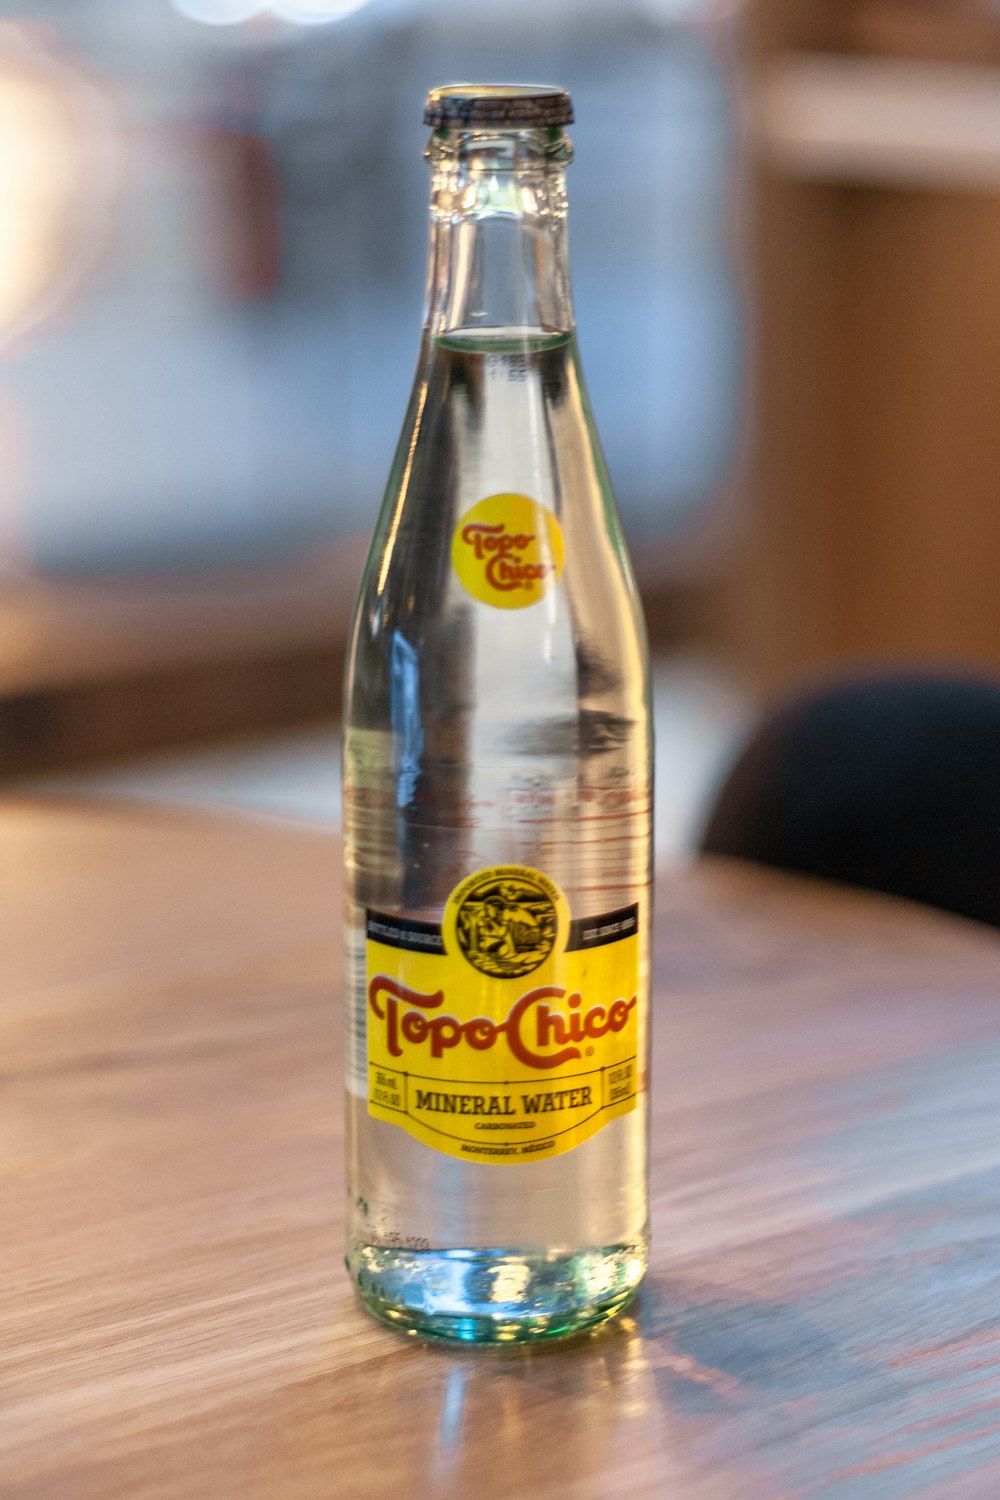 Tope Chico bottle